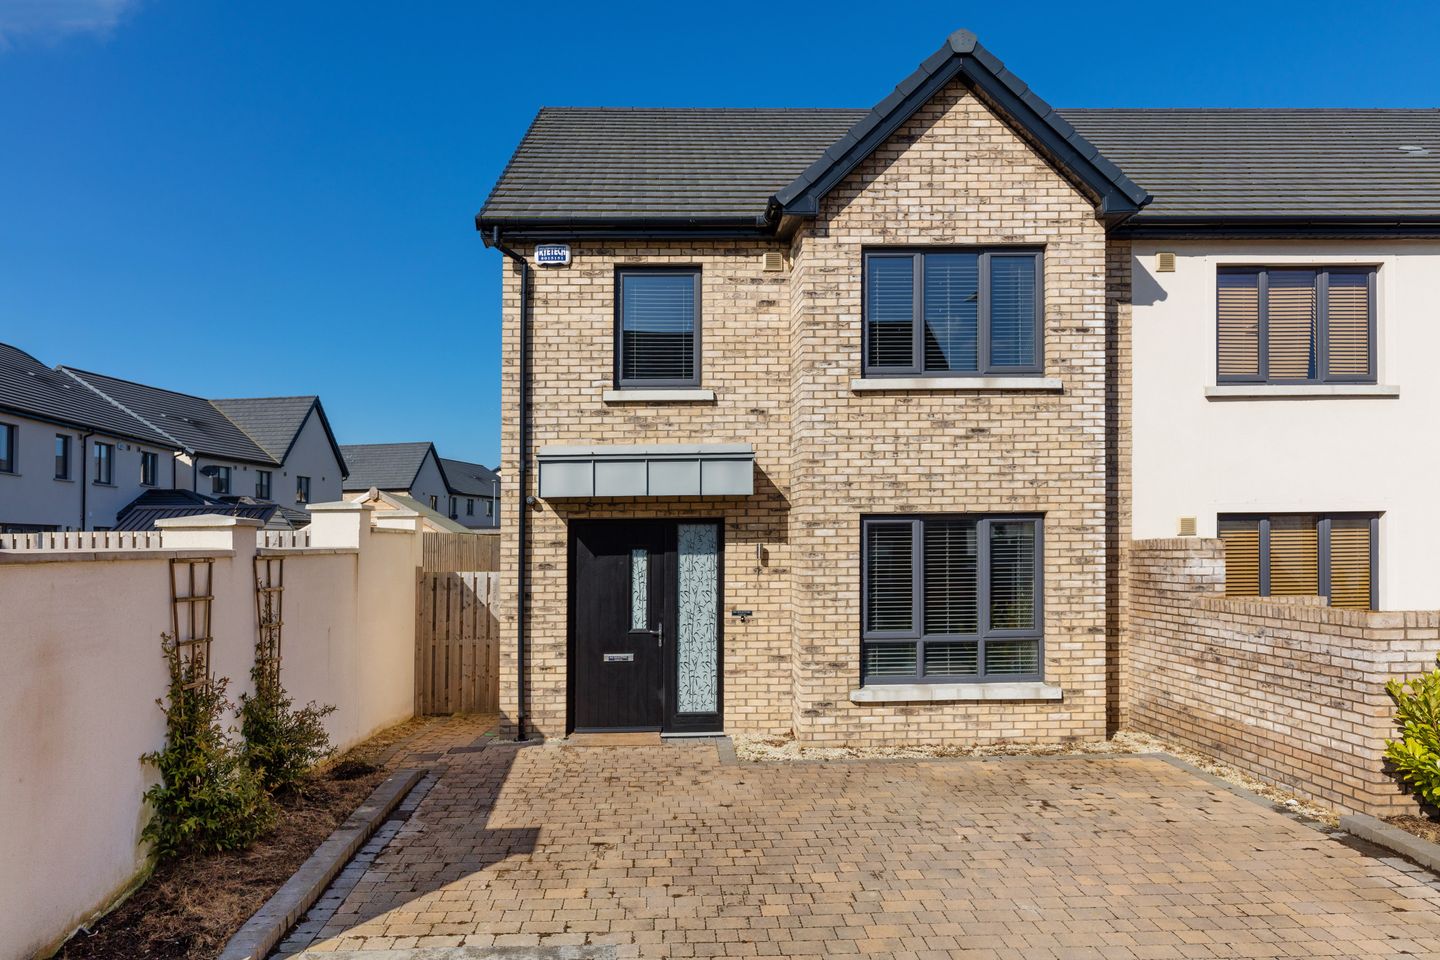 1 The Court, Semple Woods, Donabate, Co. Dublin, K36DX34